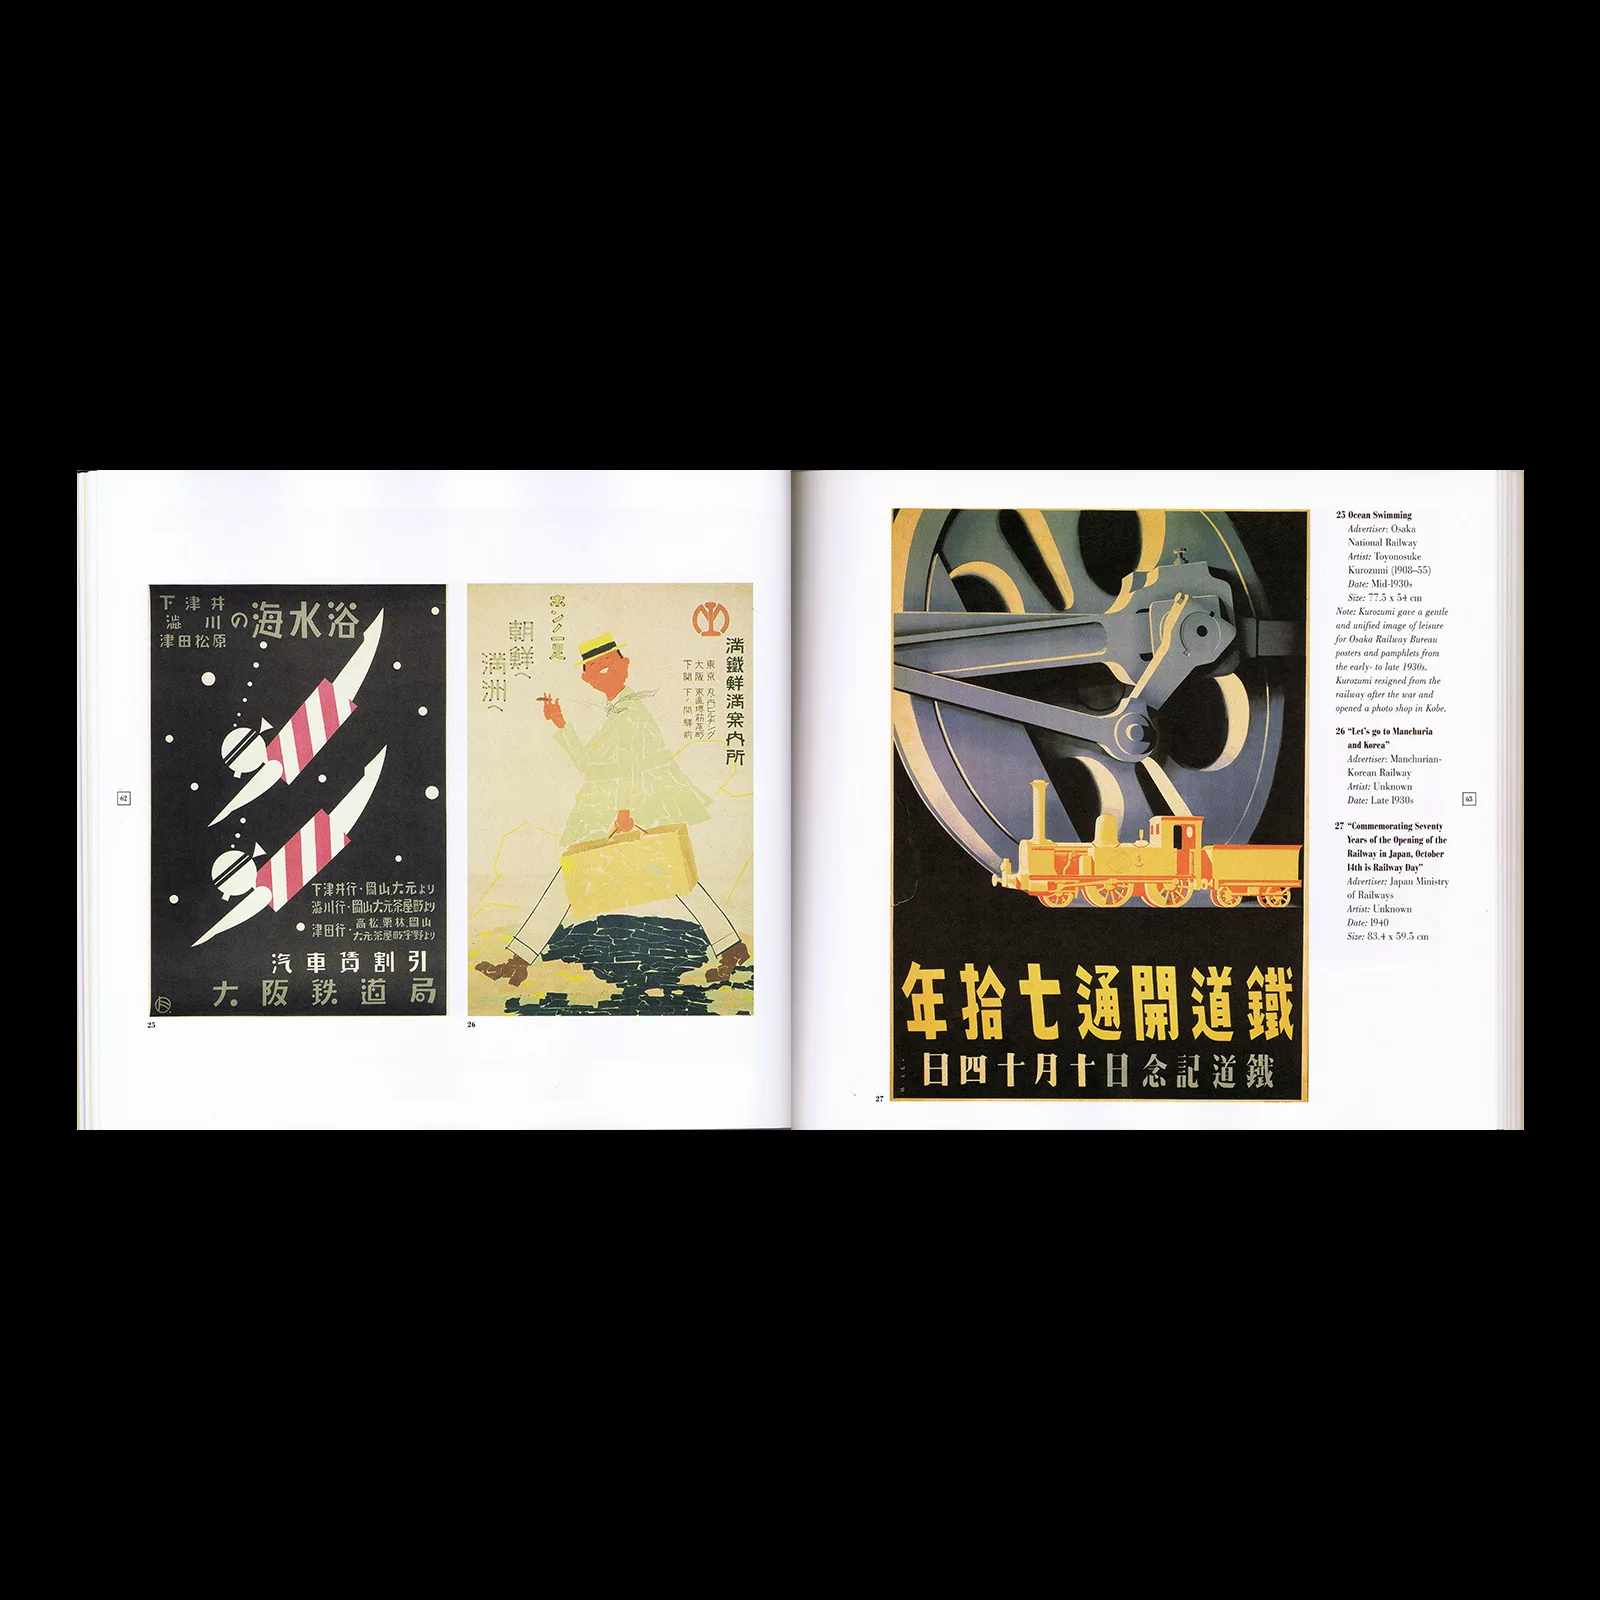 Japanese Modern - Graphic Design Between the Wars, Chronicle Books, 1996